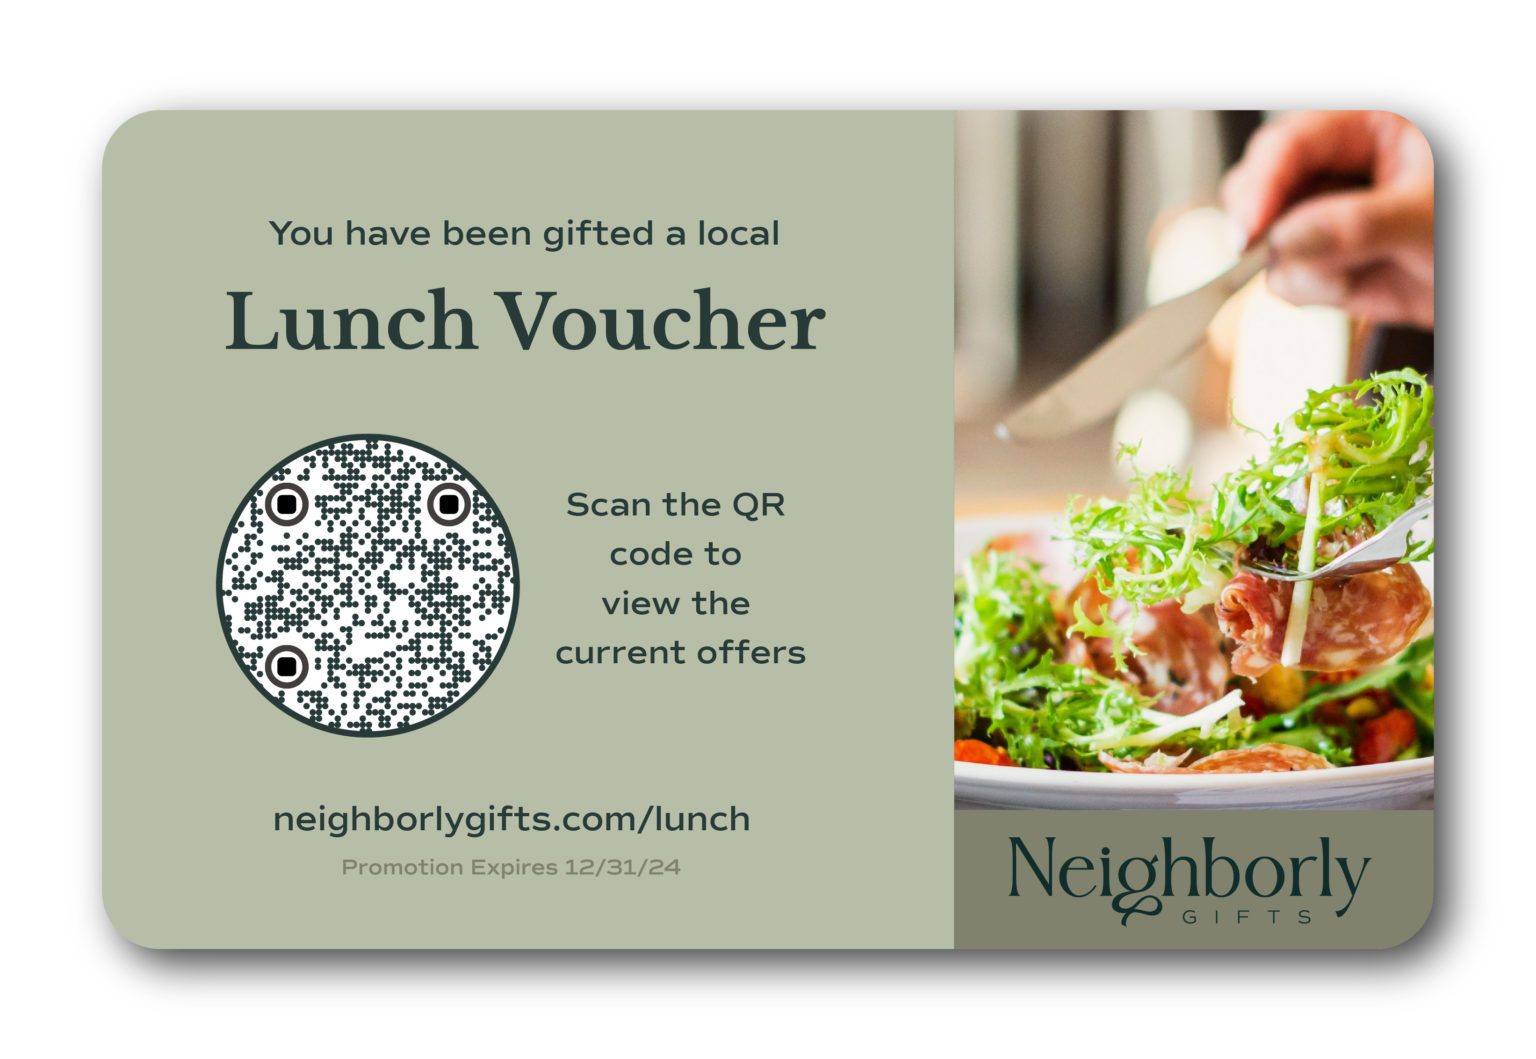 Special offers on restaurant vouchers